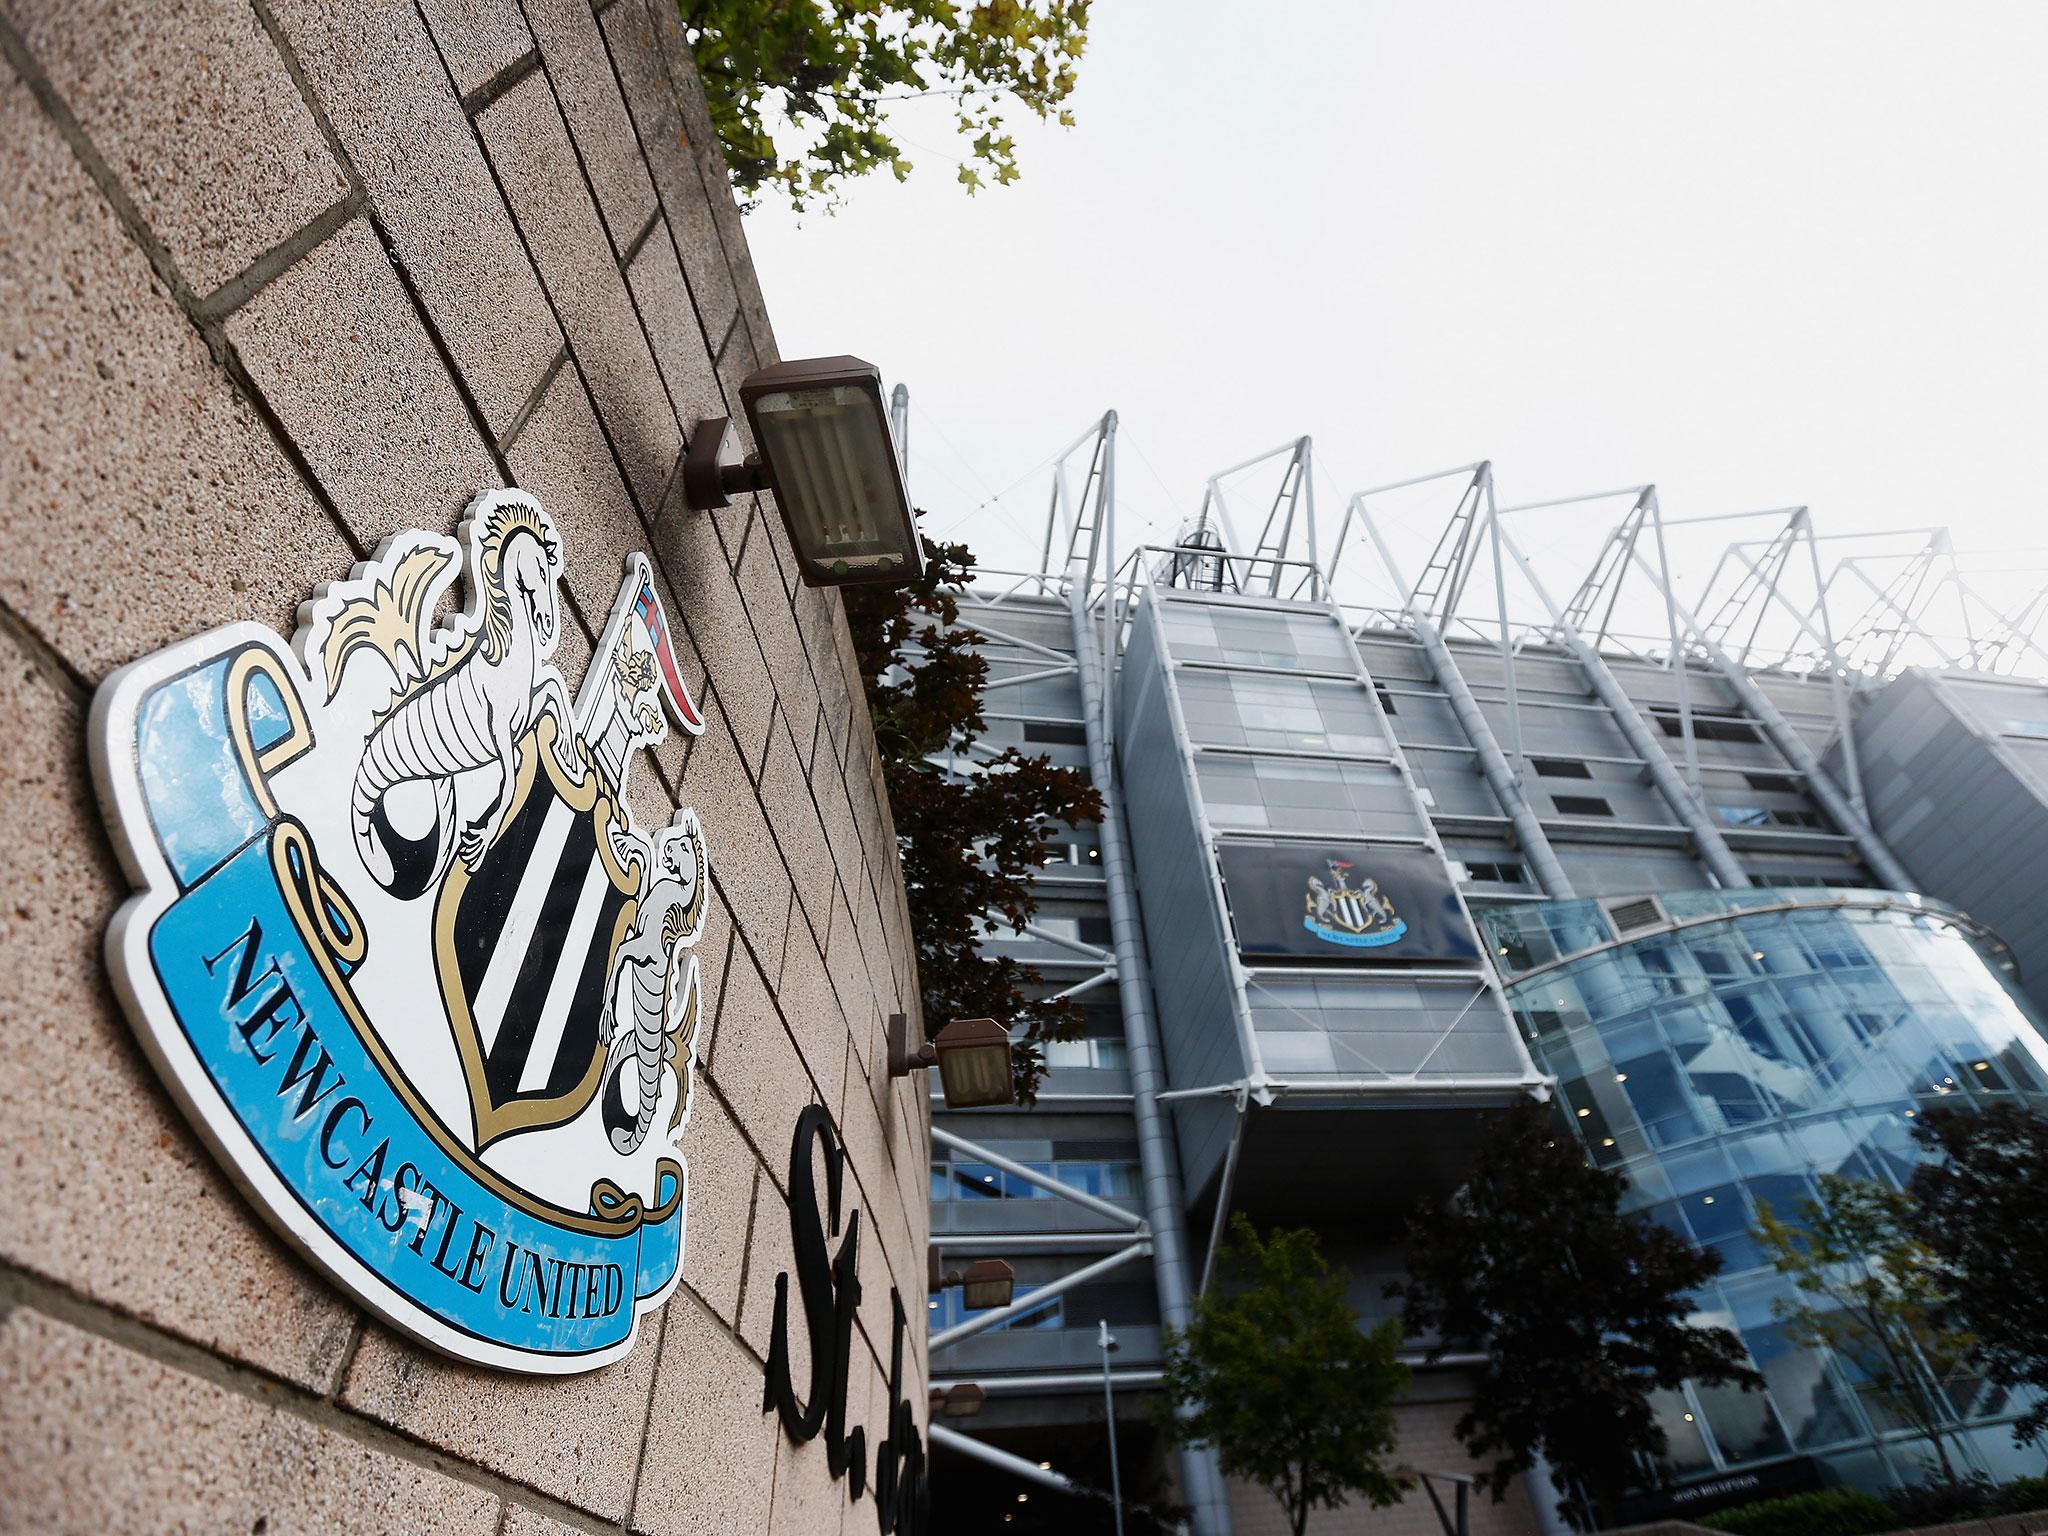 Newcastle are apparently the subject of interest from China